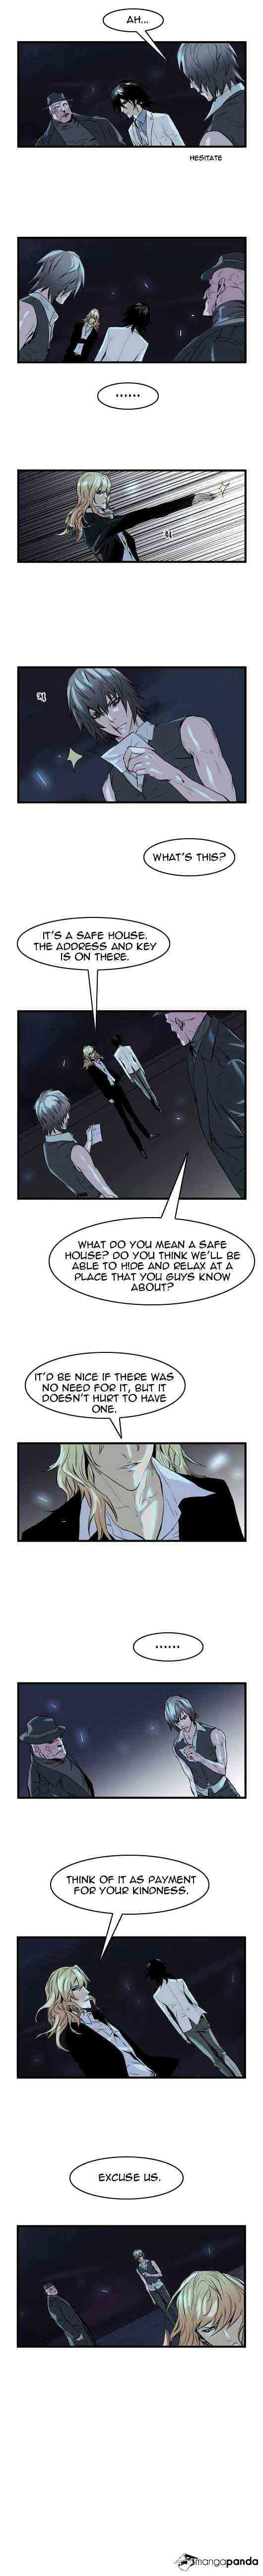 Noblesse Chapter 59 page 4